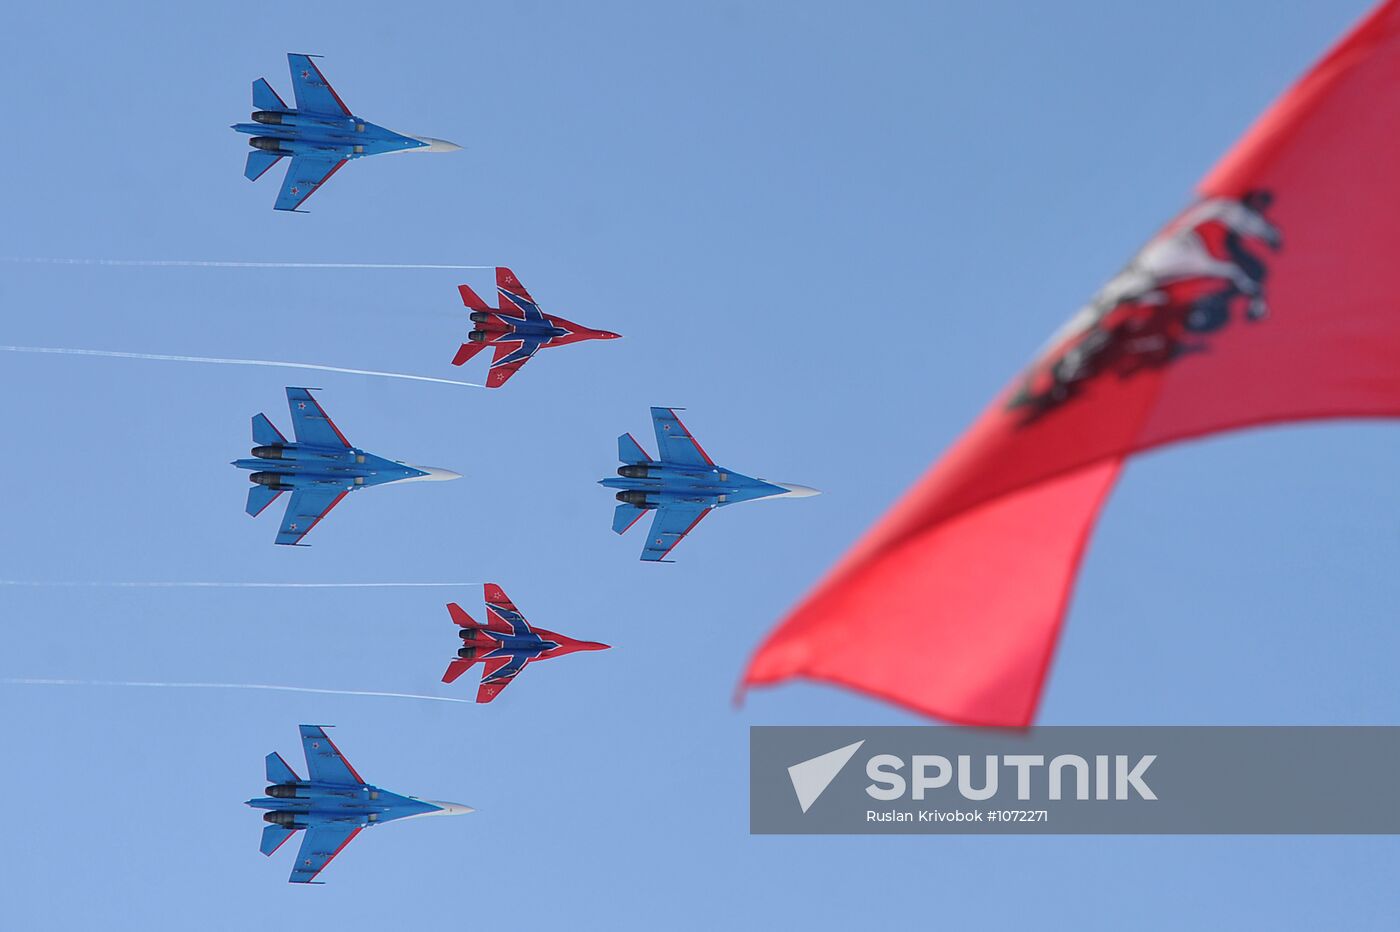 Russian Knights and Strizhi pilot groups